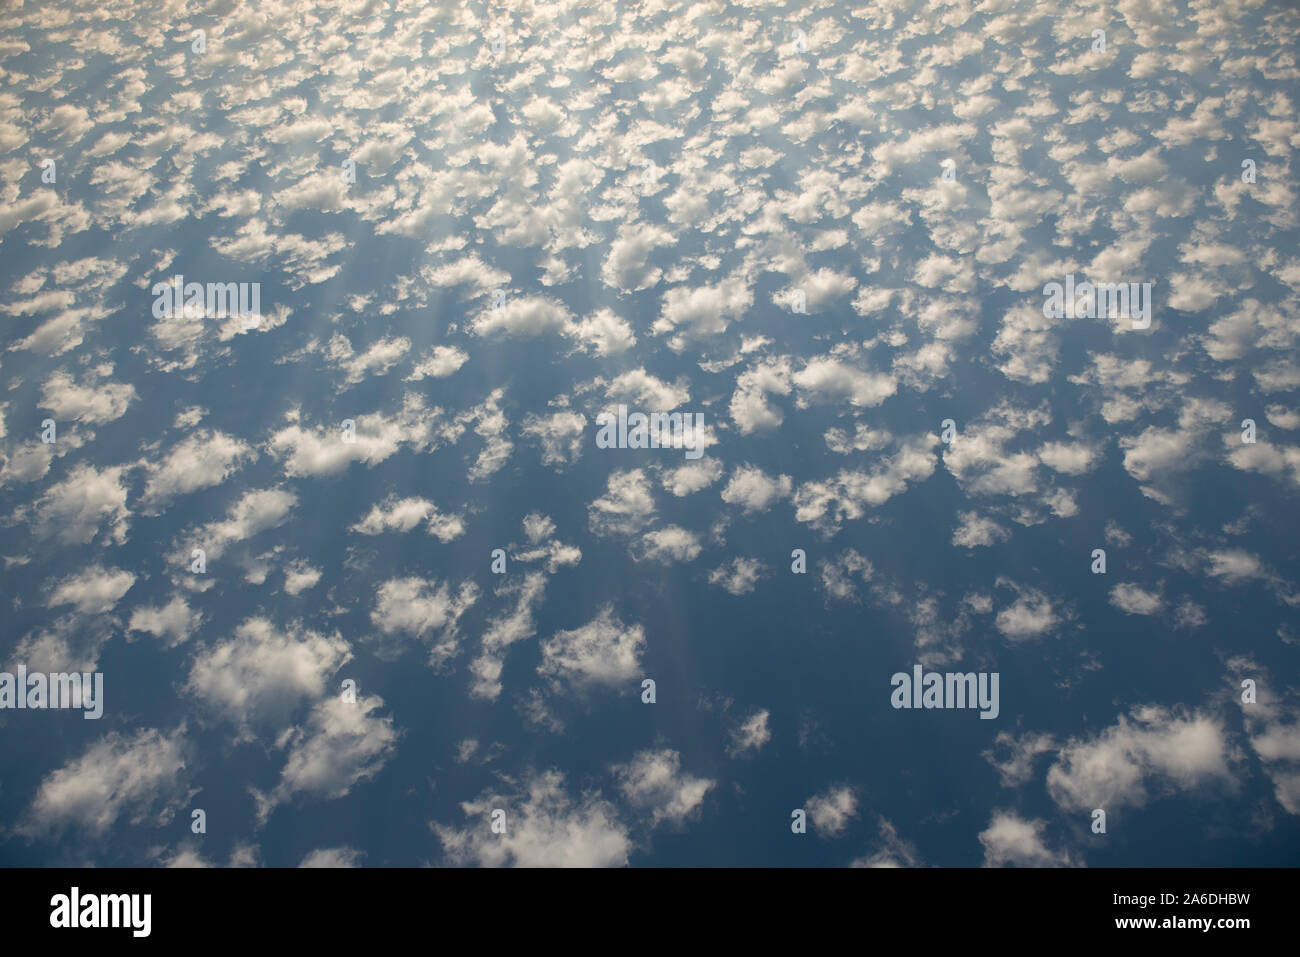 Stratocumulus clouds on a blue sky during a bright sunny day Stock Photo